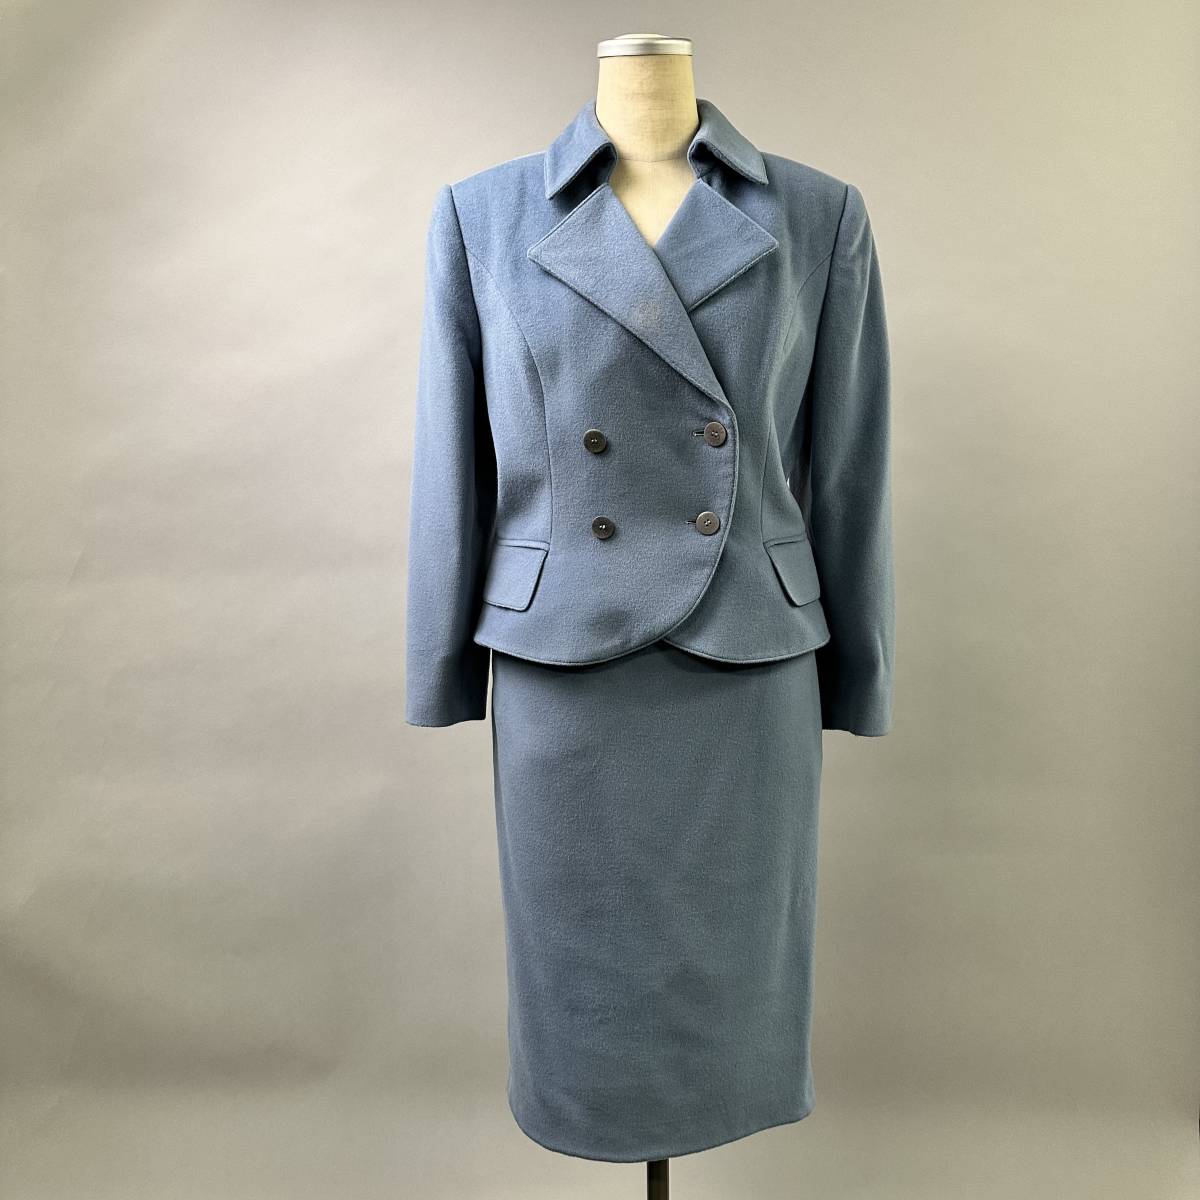  cleaning settled Vintage HERMES Hermes suit 42 top and bottom jacket skirt blue group lady's 